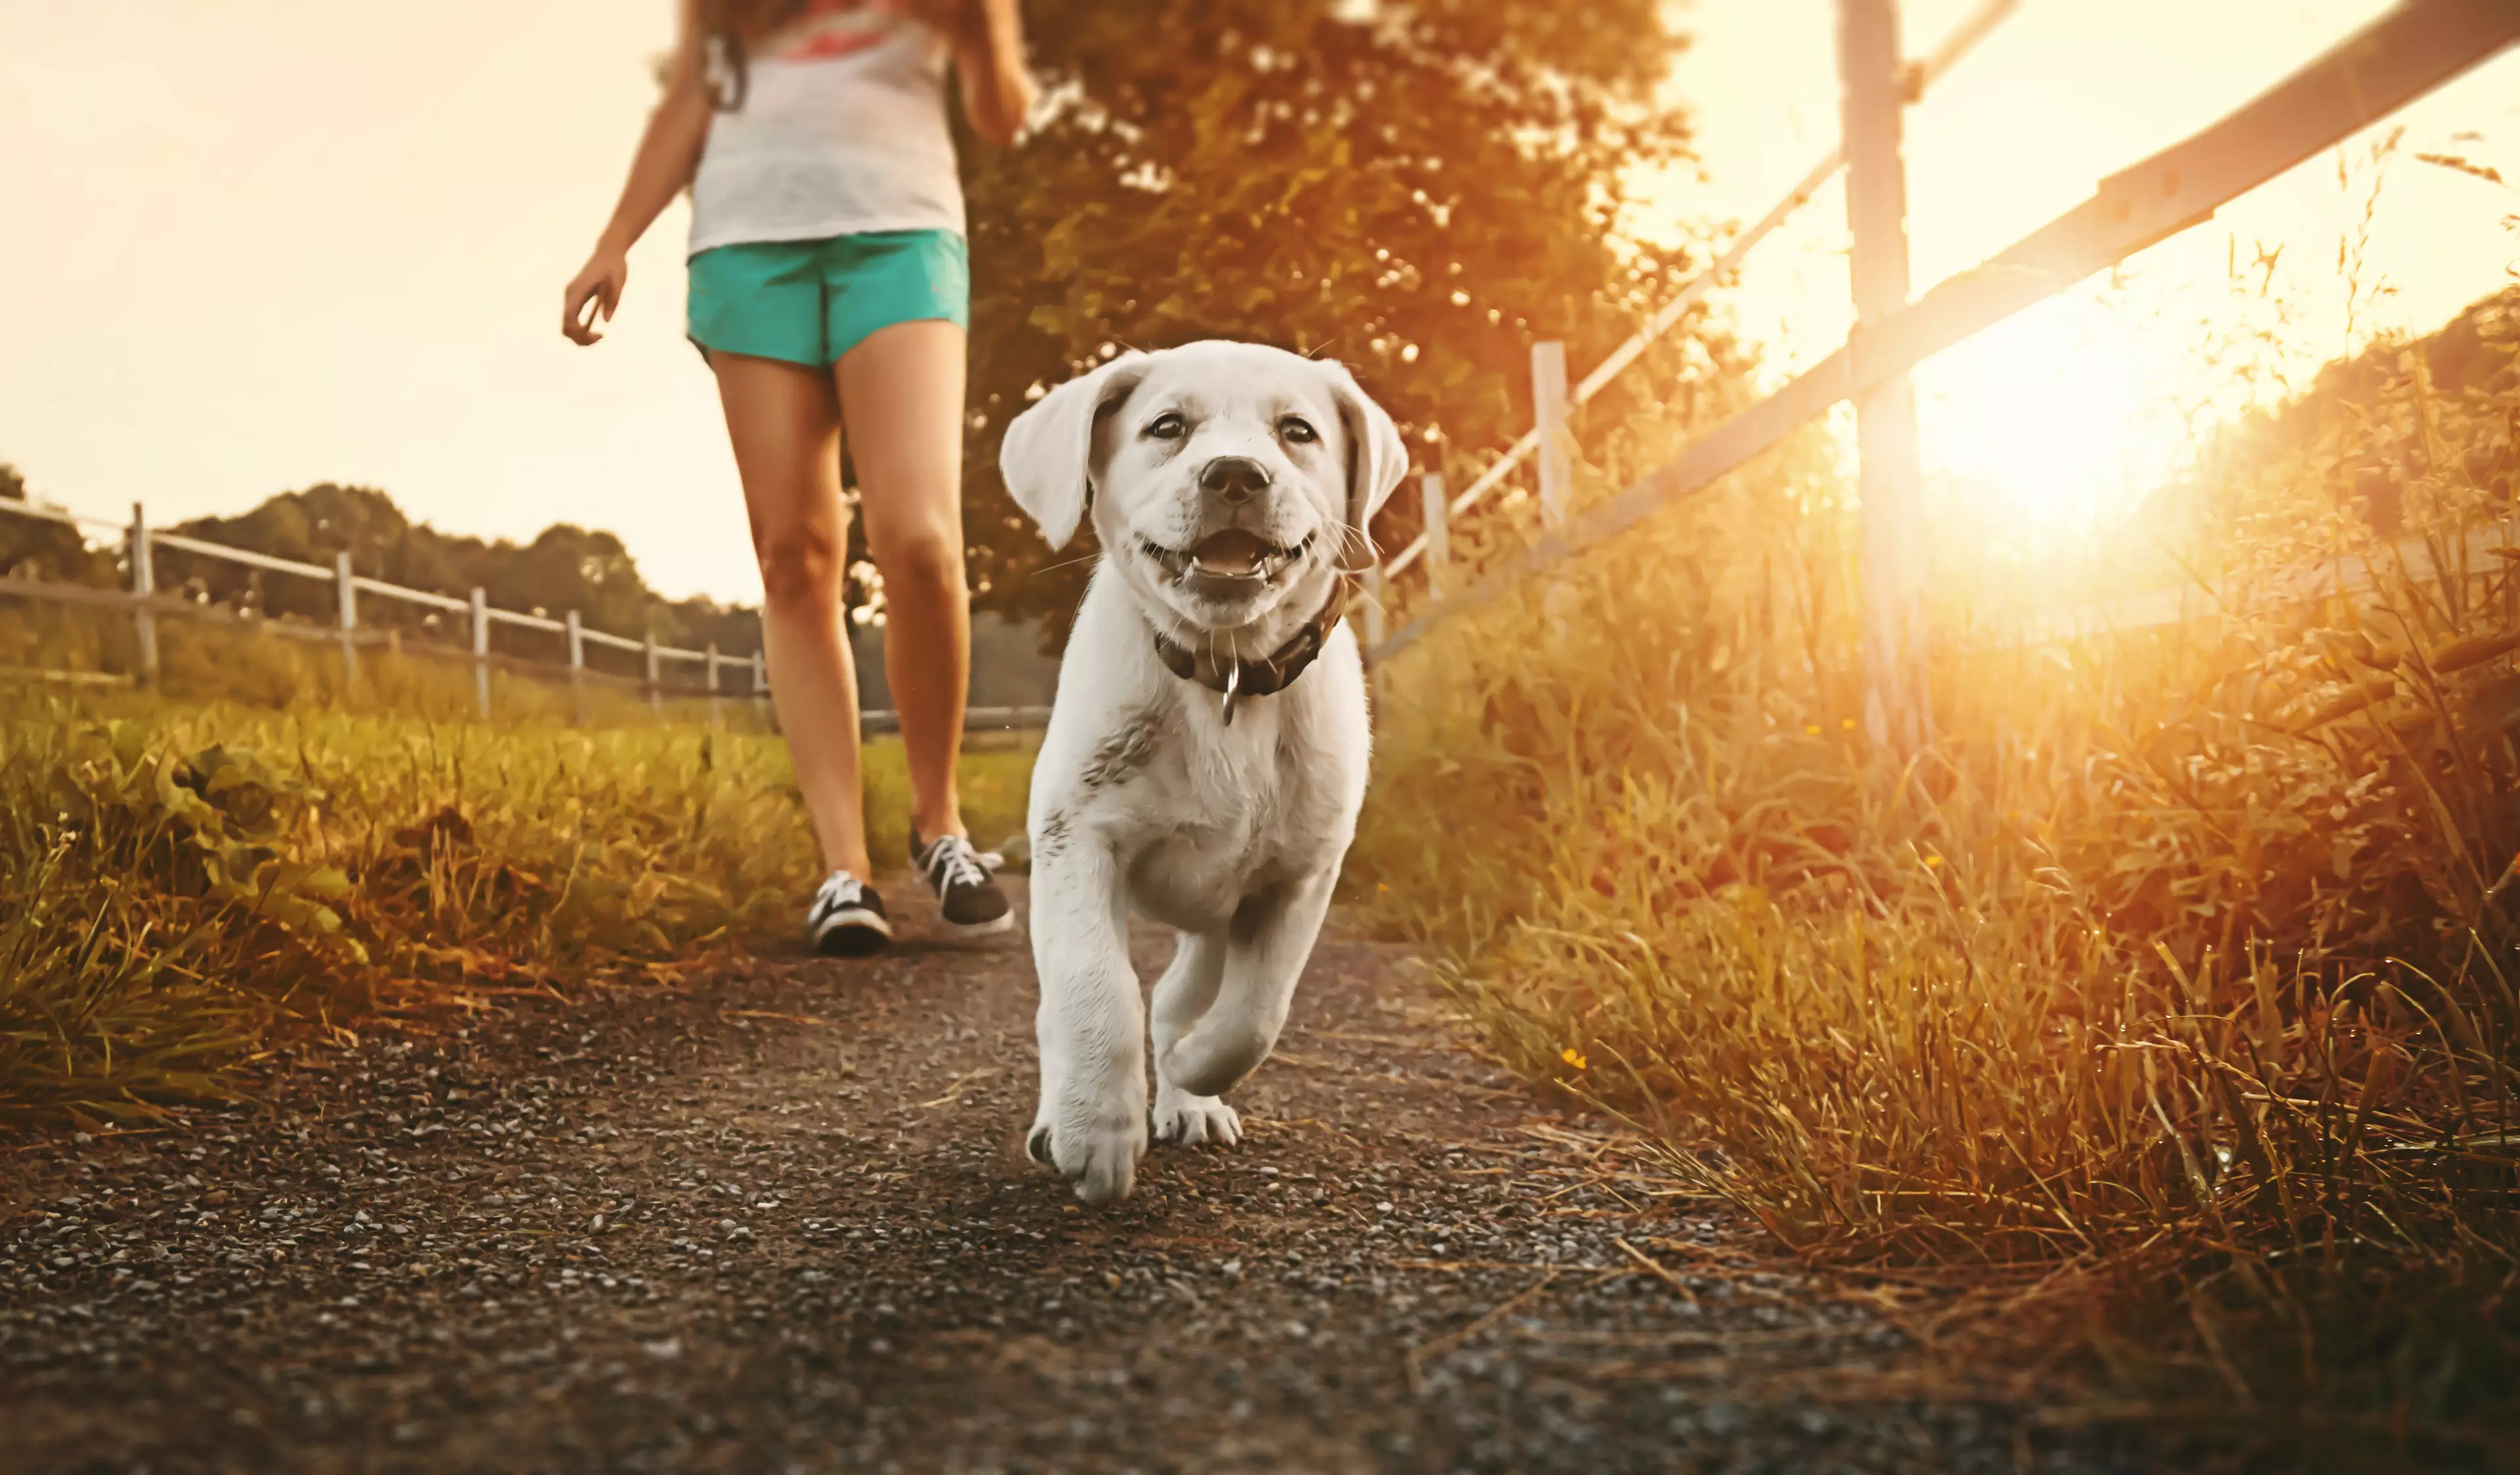 It's best to walk your dog in the mornings or evenings when it's cooler (